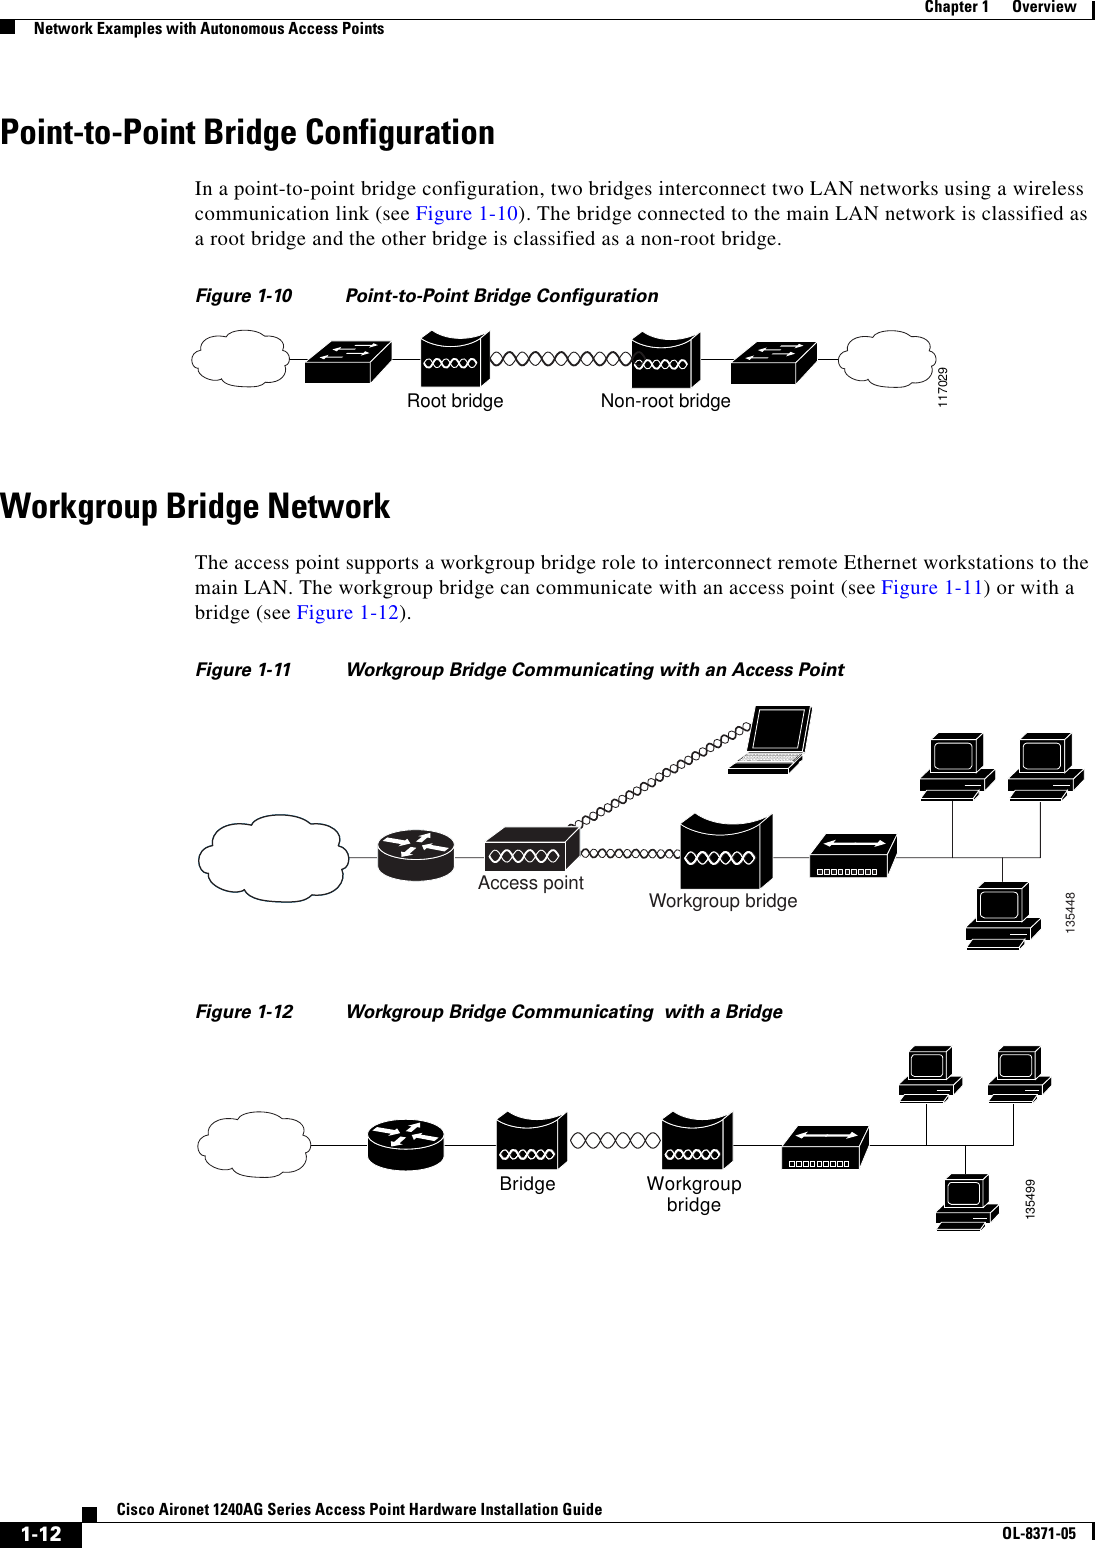  1-12Cisco Aironet 1240AG Series Access Point Hardware Installation GuideOL-8371-05Chapter 1      OverviewNetwork Examples with Autonomous Access PointsPoint-to-Point Bridge ConfigurationIn a point-to-point bridge configuration, two bridges interconnect two LAN networks using a wireless communication link (see Figure 1-10). The bridge connected to the main LAN network is classified as a root bridge and the other bridge is classified as a non-root bridge.Figure 1-10 Point-to-Point Bridge ConfigurationWorkgroup Bridge NetworkThe access point supports a workgroup bridge role to interconnect remote Ethernet workstations to the main LAN. The workgroup bridge can communicate with an access point (see Figure 1-11) or with a bridge (see Figure 1-12).Figure 1-11 Workgroup Bridge Communicating with an Access Point Figure 1-12 Workgroup Bridge Communicating  with a Bridge 117029Root bridge Non-root bridgeAccess point Workgroup bridge135448Bridge Workgroupbridge135499